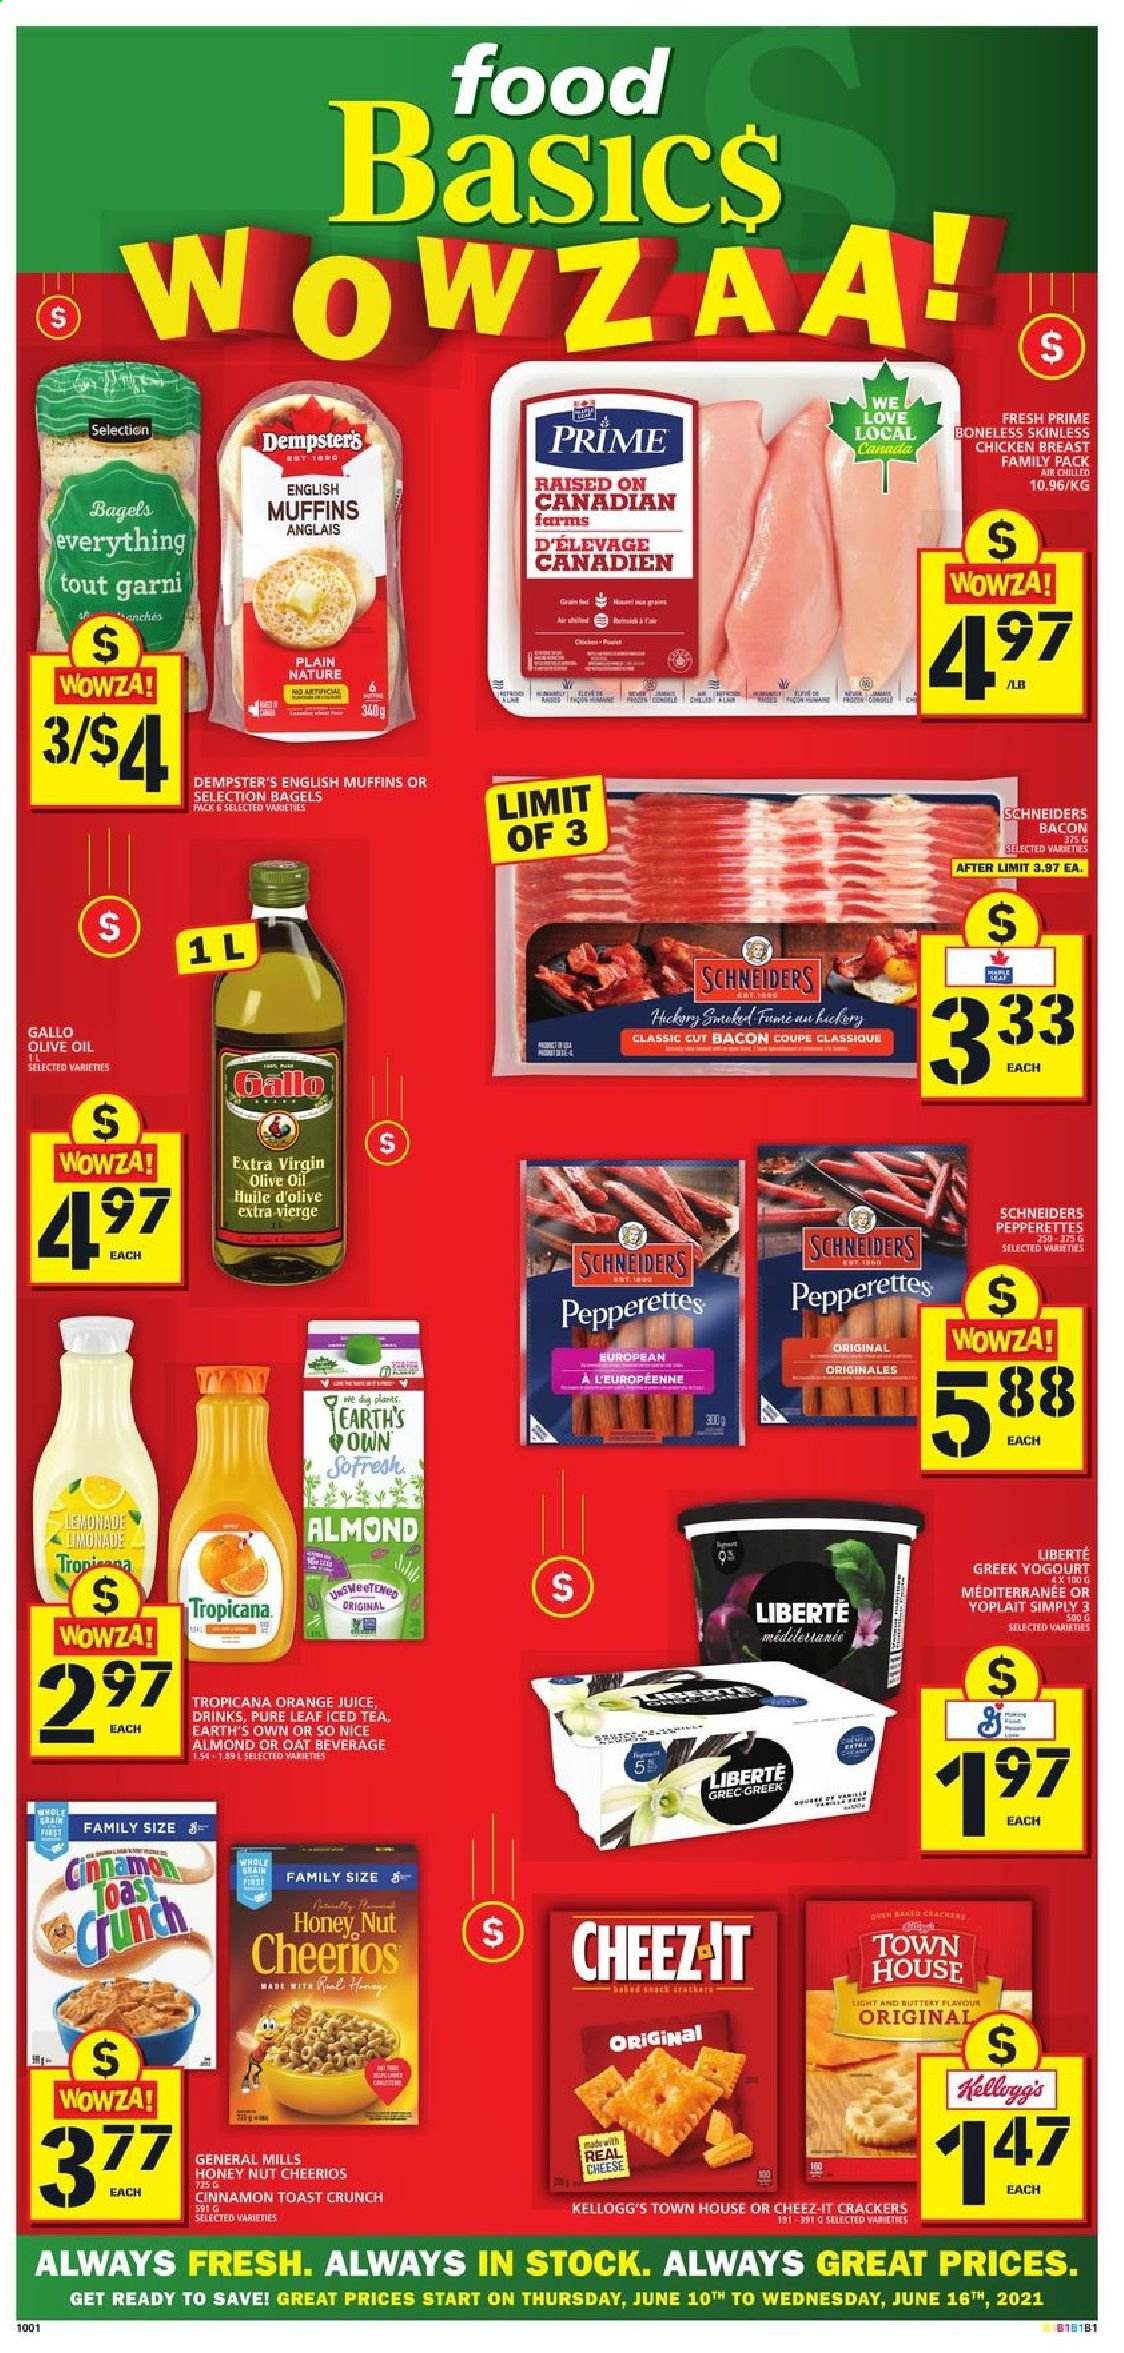 thumbnail - Food Basics Flyer - June 10, 2021 - June 16, 2021 - Sales products - bagels, english muffins, bacon, cheese, Yoplait, crackers, Kellogg's, Cheez-It, Cheerios, cinnamon, extra virgin olive oil, olive oil, oil, orange juice, juice, ice tea, Pure Leaf, So Nice, chicken breasts, chicken. Page 1.